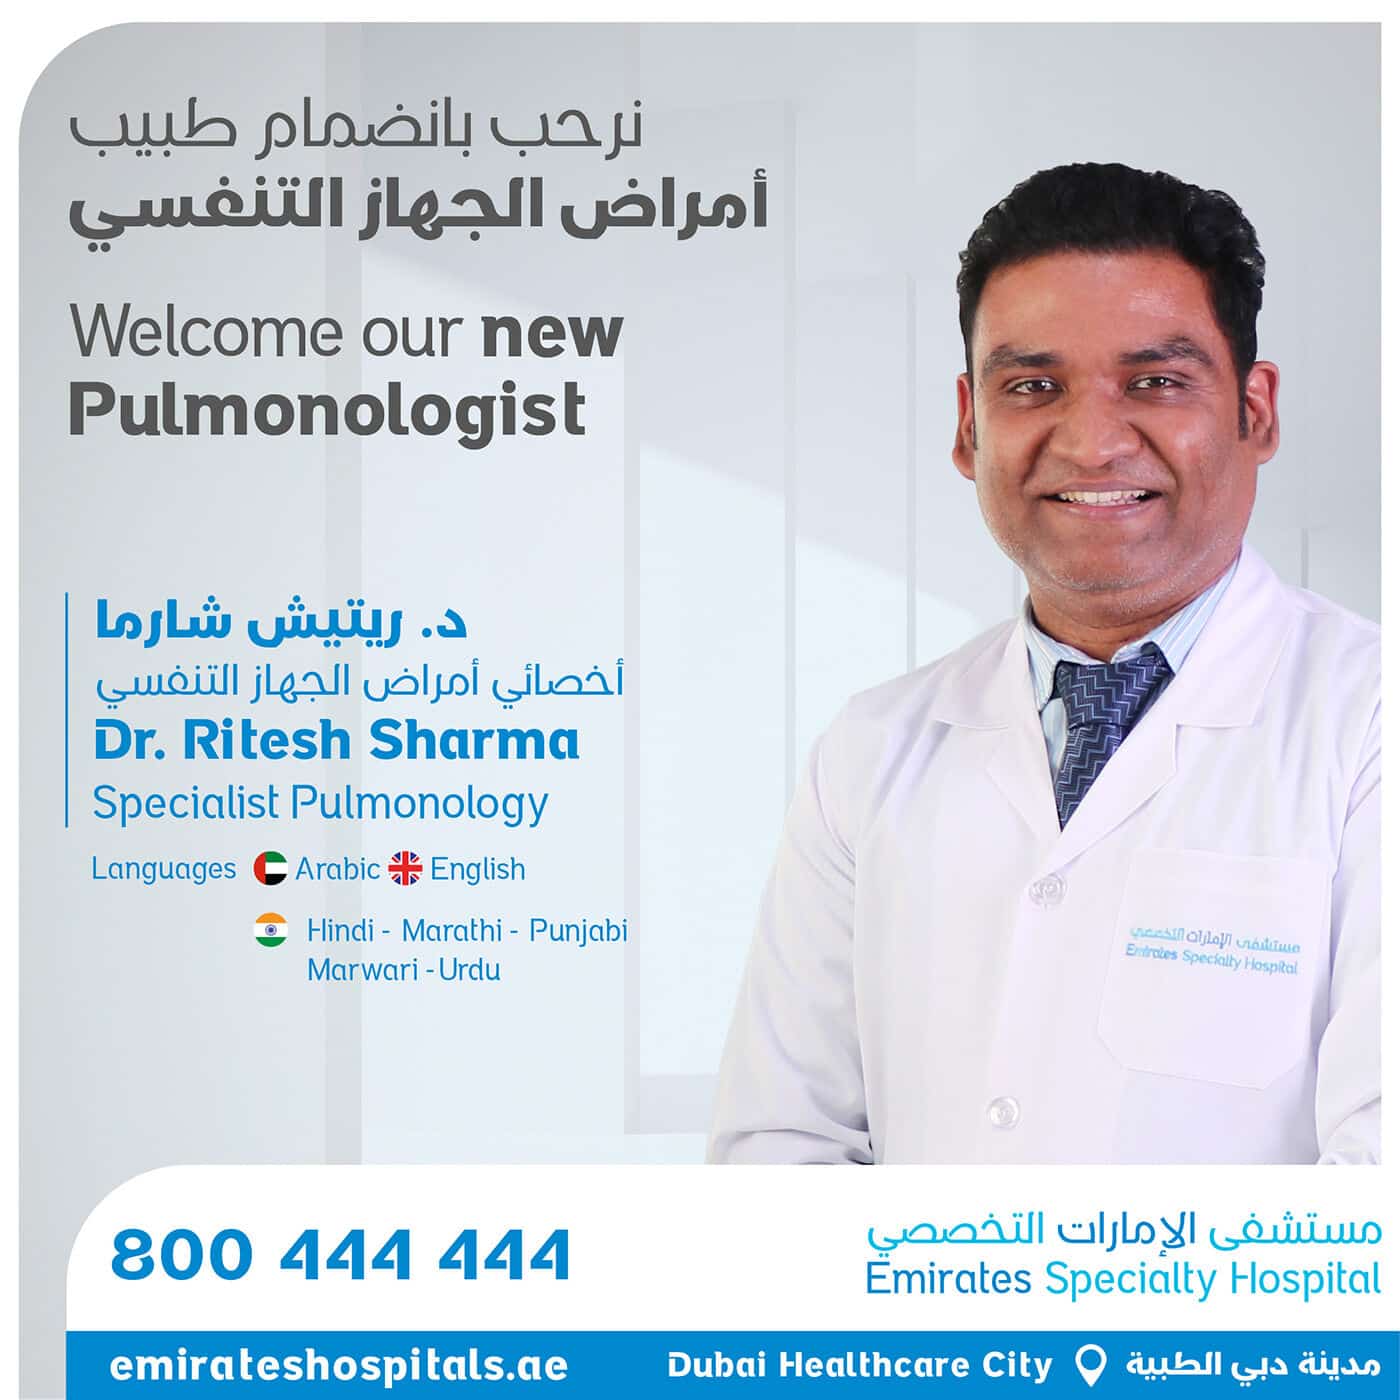 Dr. Ritesh Sharma , Specialist Pulmonology , Joined Emirates Specialty Hospital in Dubai Healthcare City